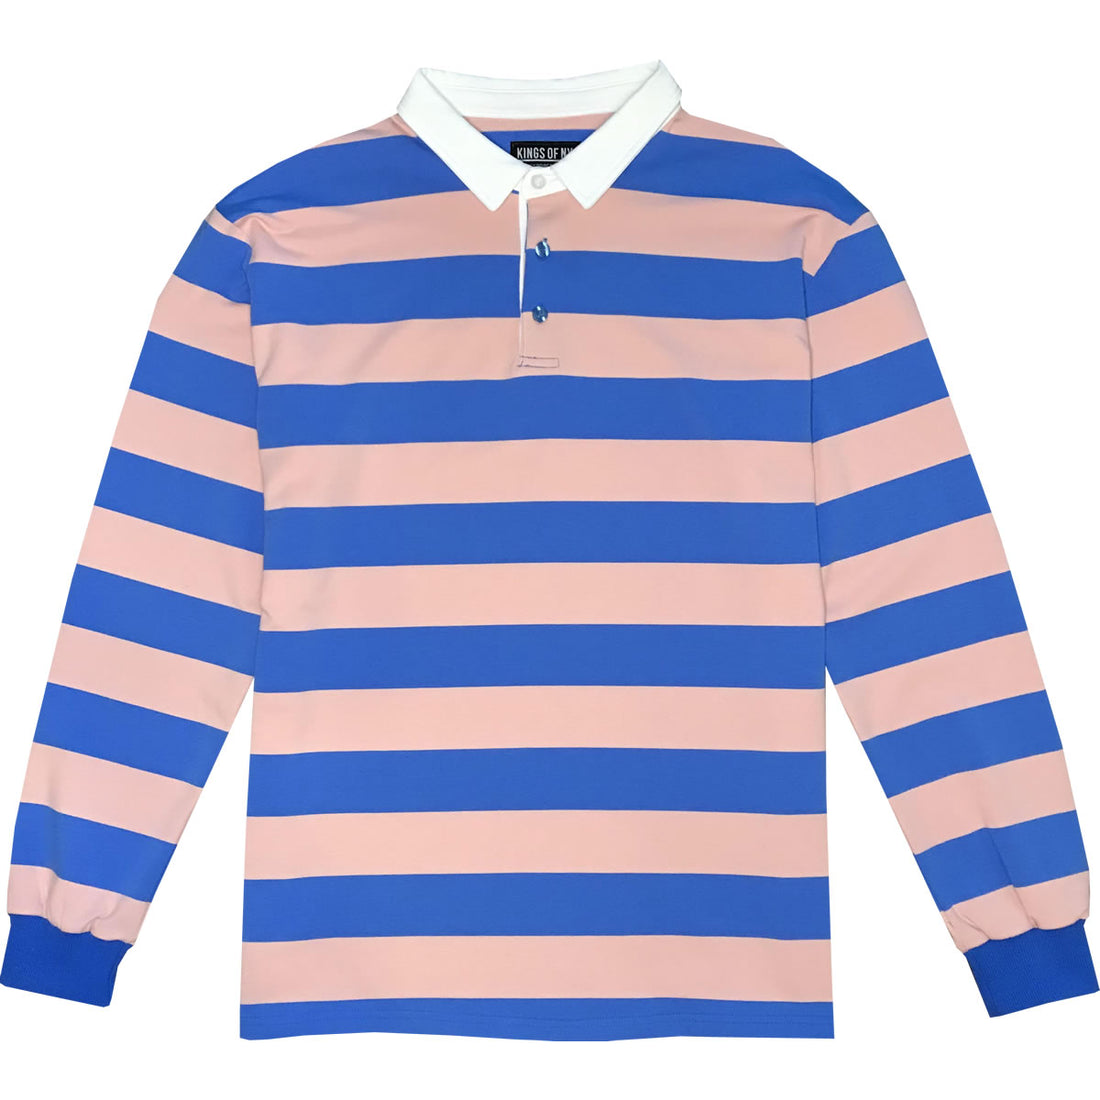 Kings of NY Navy Blue and Red Comfortable Stretch Striped Mens Rugby Shirt Small / Navy Blue and Red